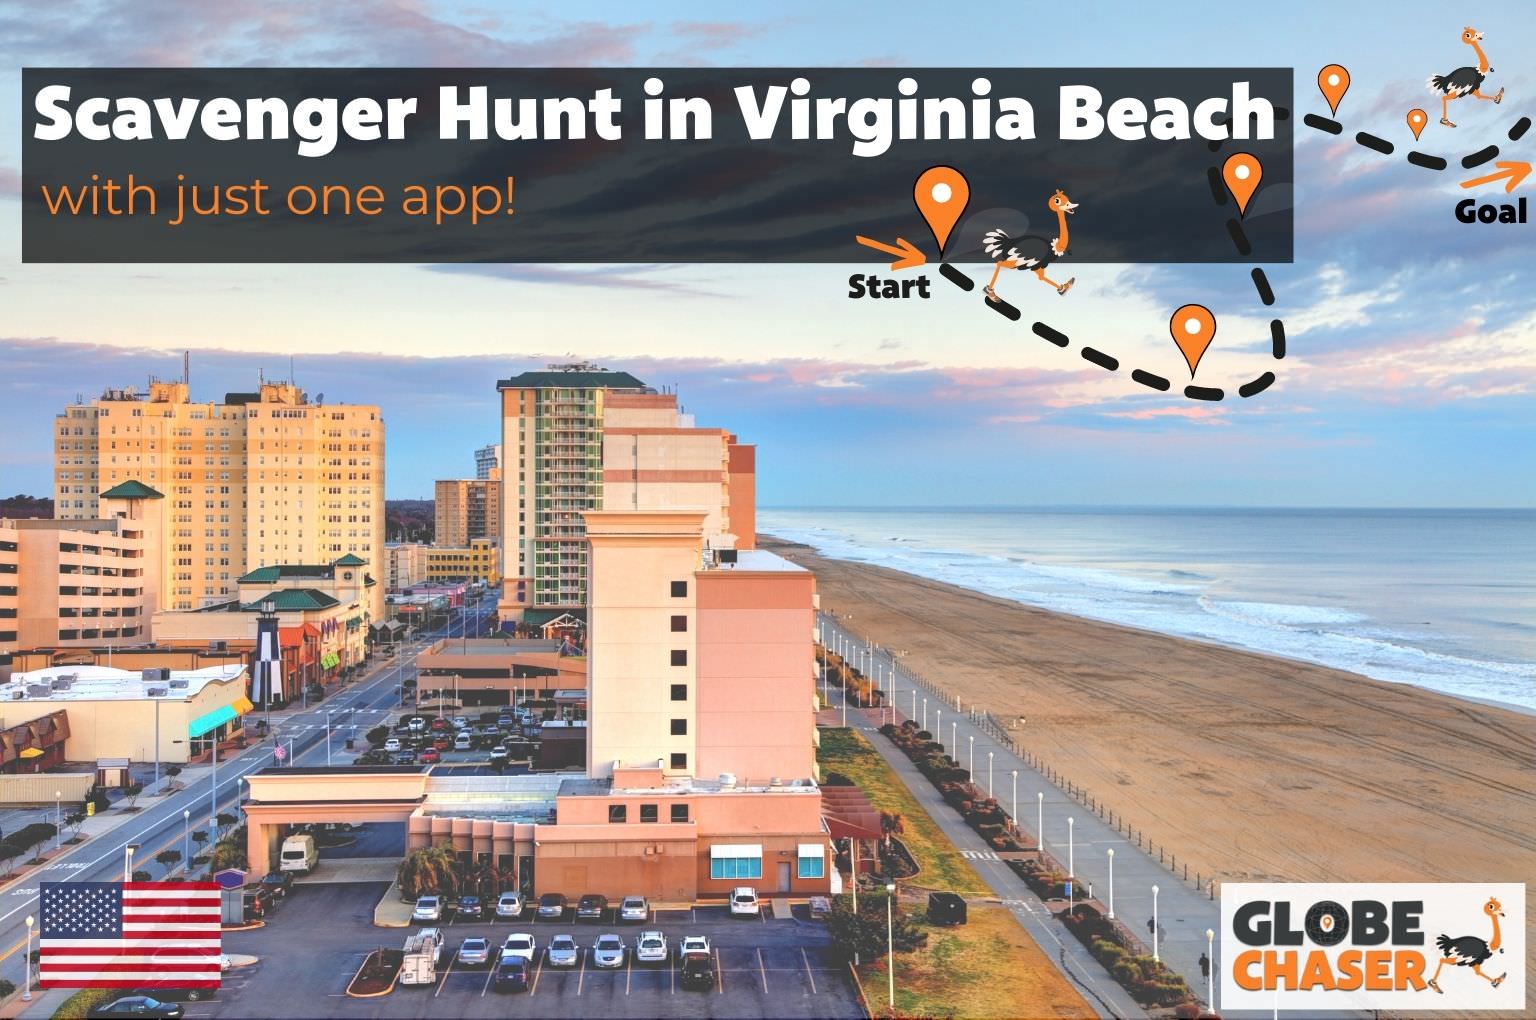 Scavenger Hunt in Virginia Beach, USA - Family Activities with the Globe Chaser App for Outdoor Fun